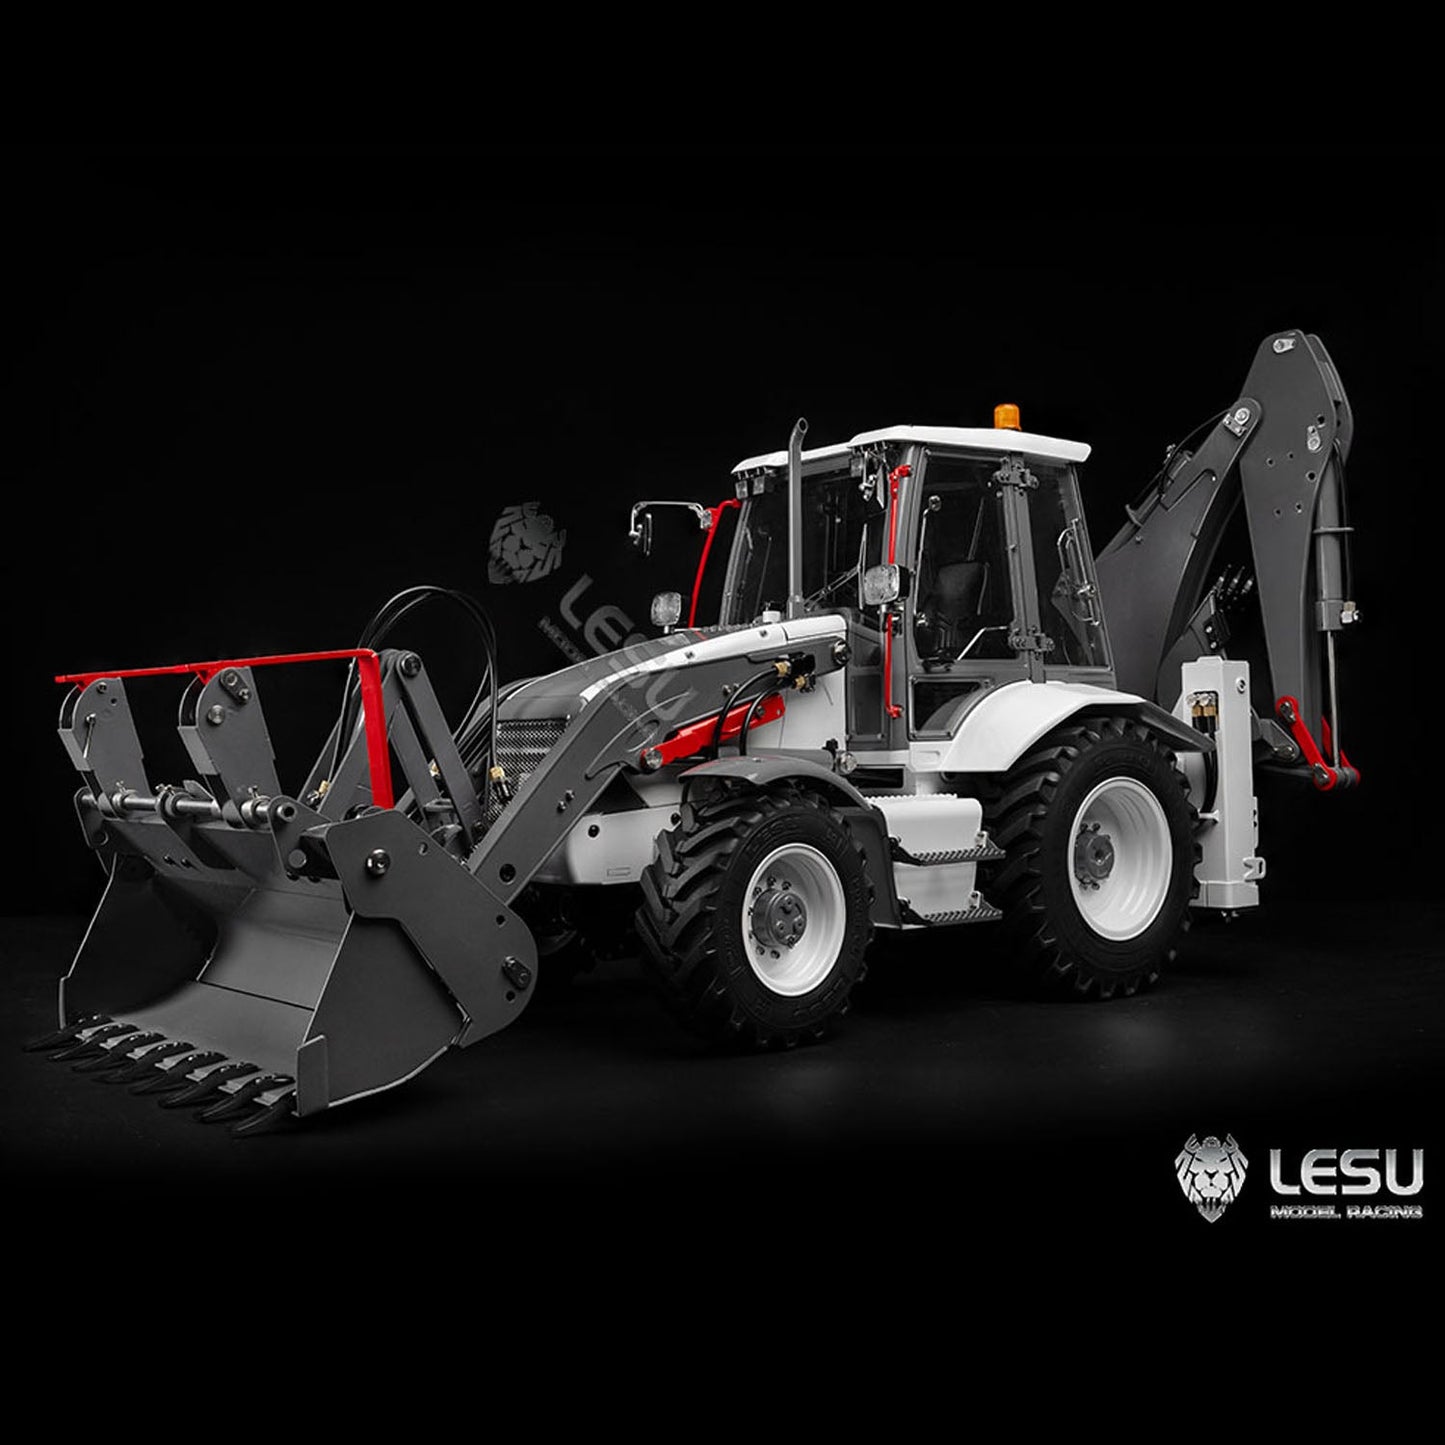 IN STOCK LESU 1/14 RC Hydraulic Equipment Remote Controlled Backhoe Loader AOUE BL71 2 in 1 Excavator Model PL18EVLite Painted Assembled teshulianjie